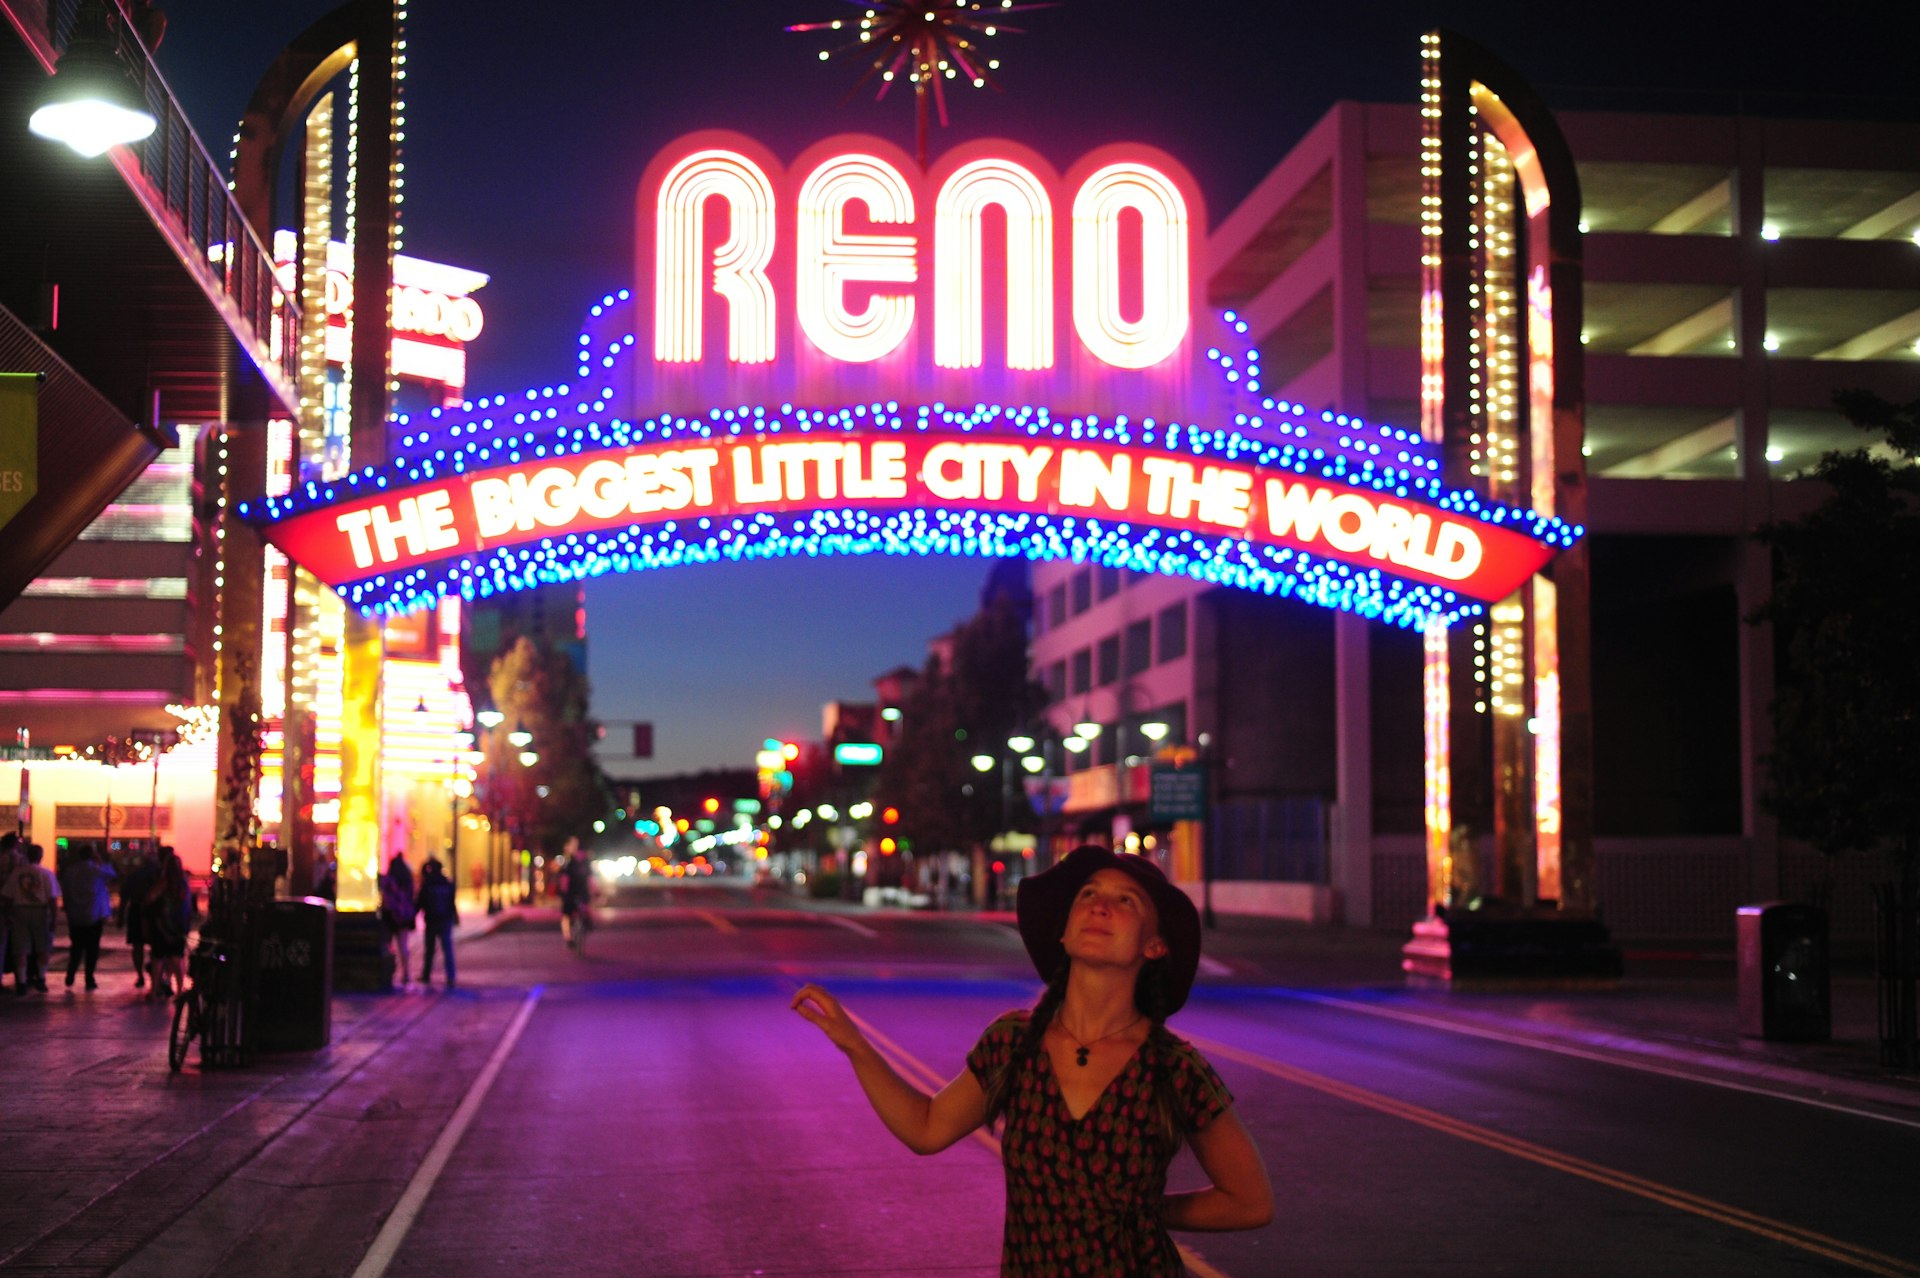 Woman looks up at the neon lights under illuminated archway sign, Commercial Row, Reno, Nevada, USA